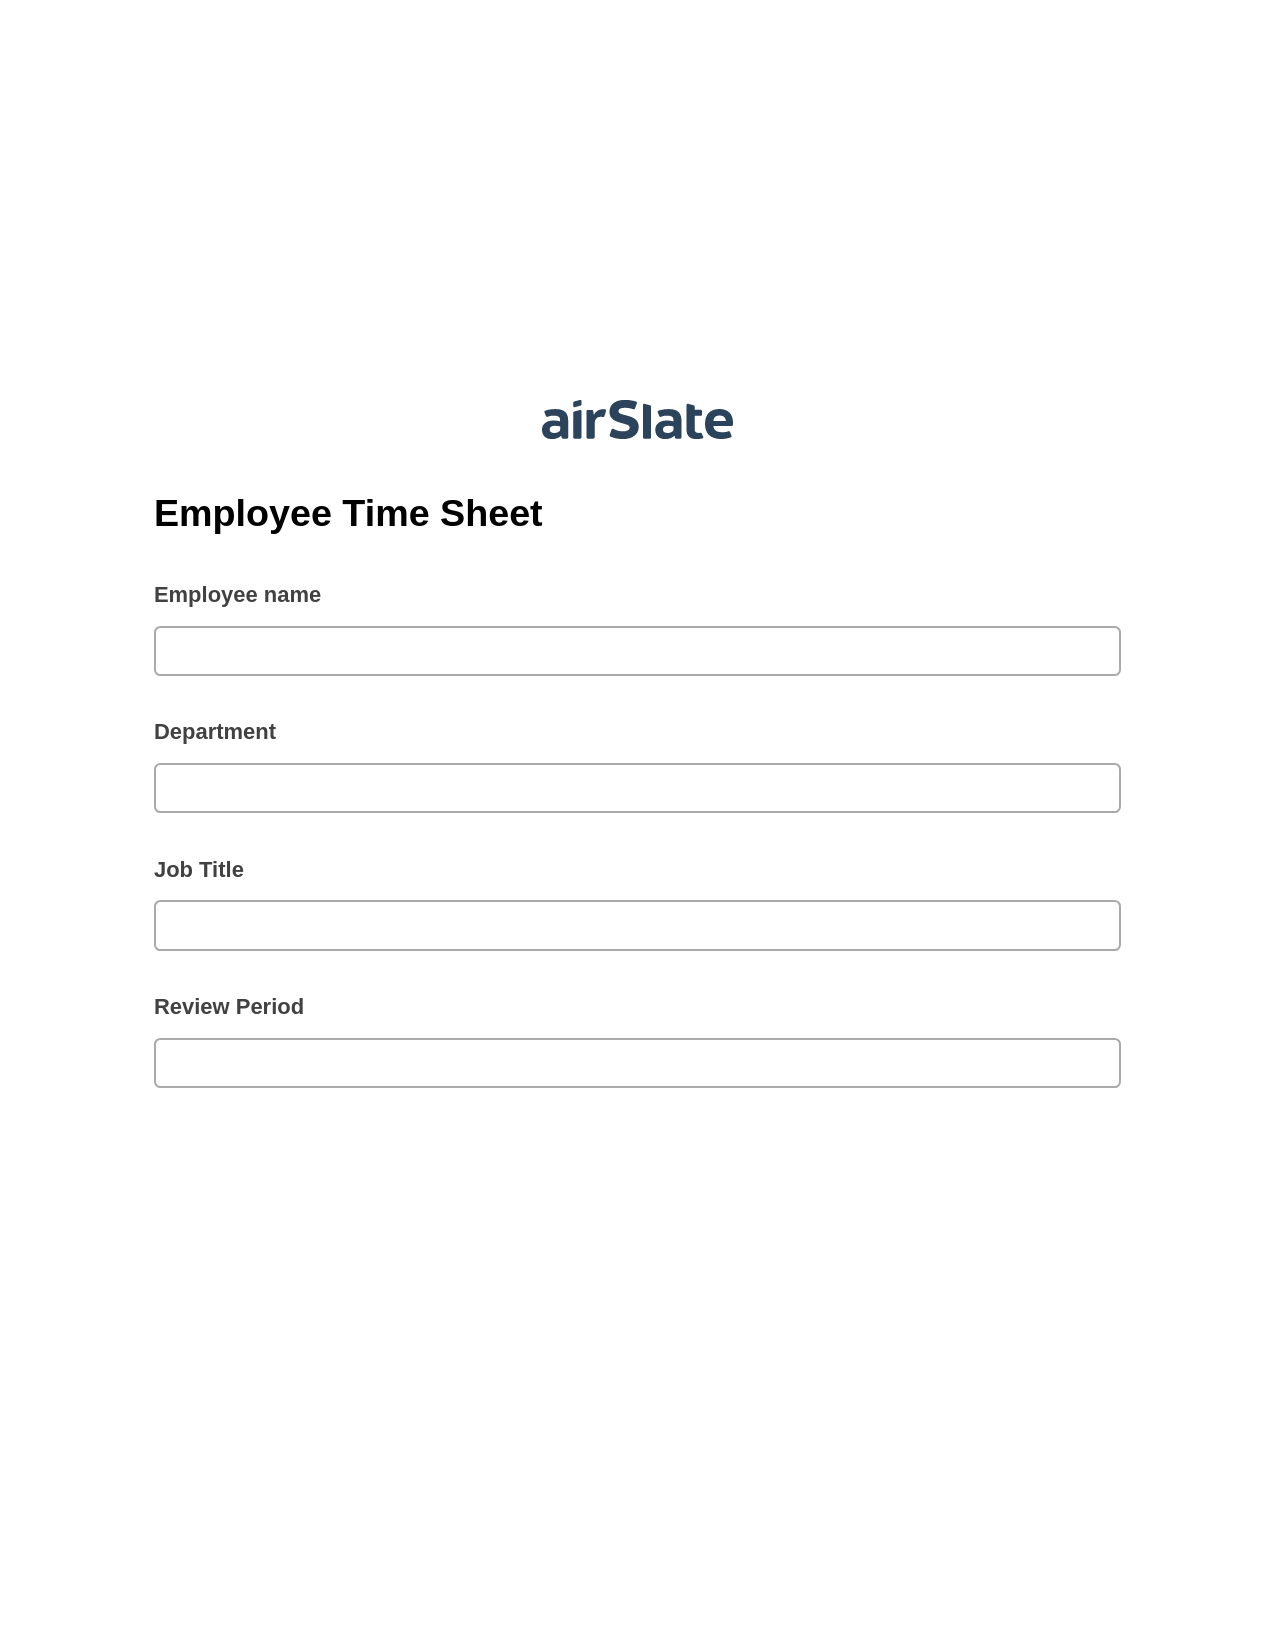 Employee Time Sheet Prefill from NetSuite records, Create Salesforce Records Bot, Archive to SharePoint Folder Bot